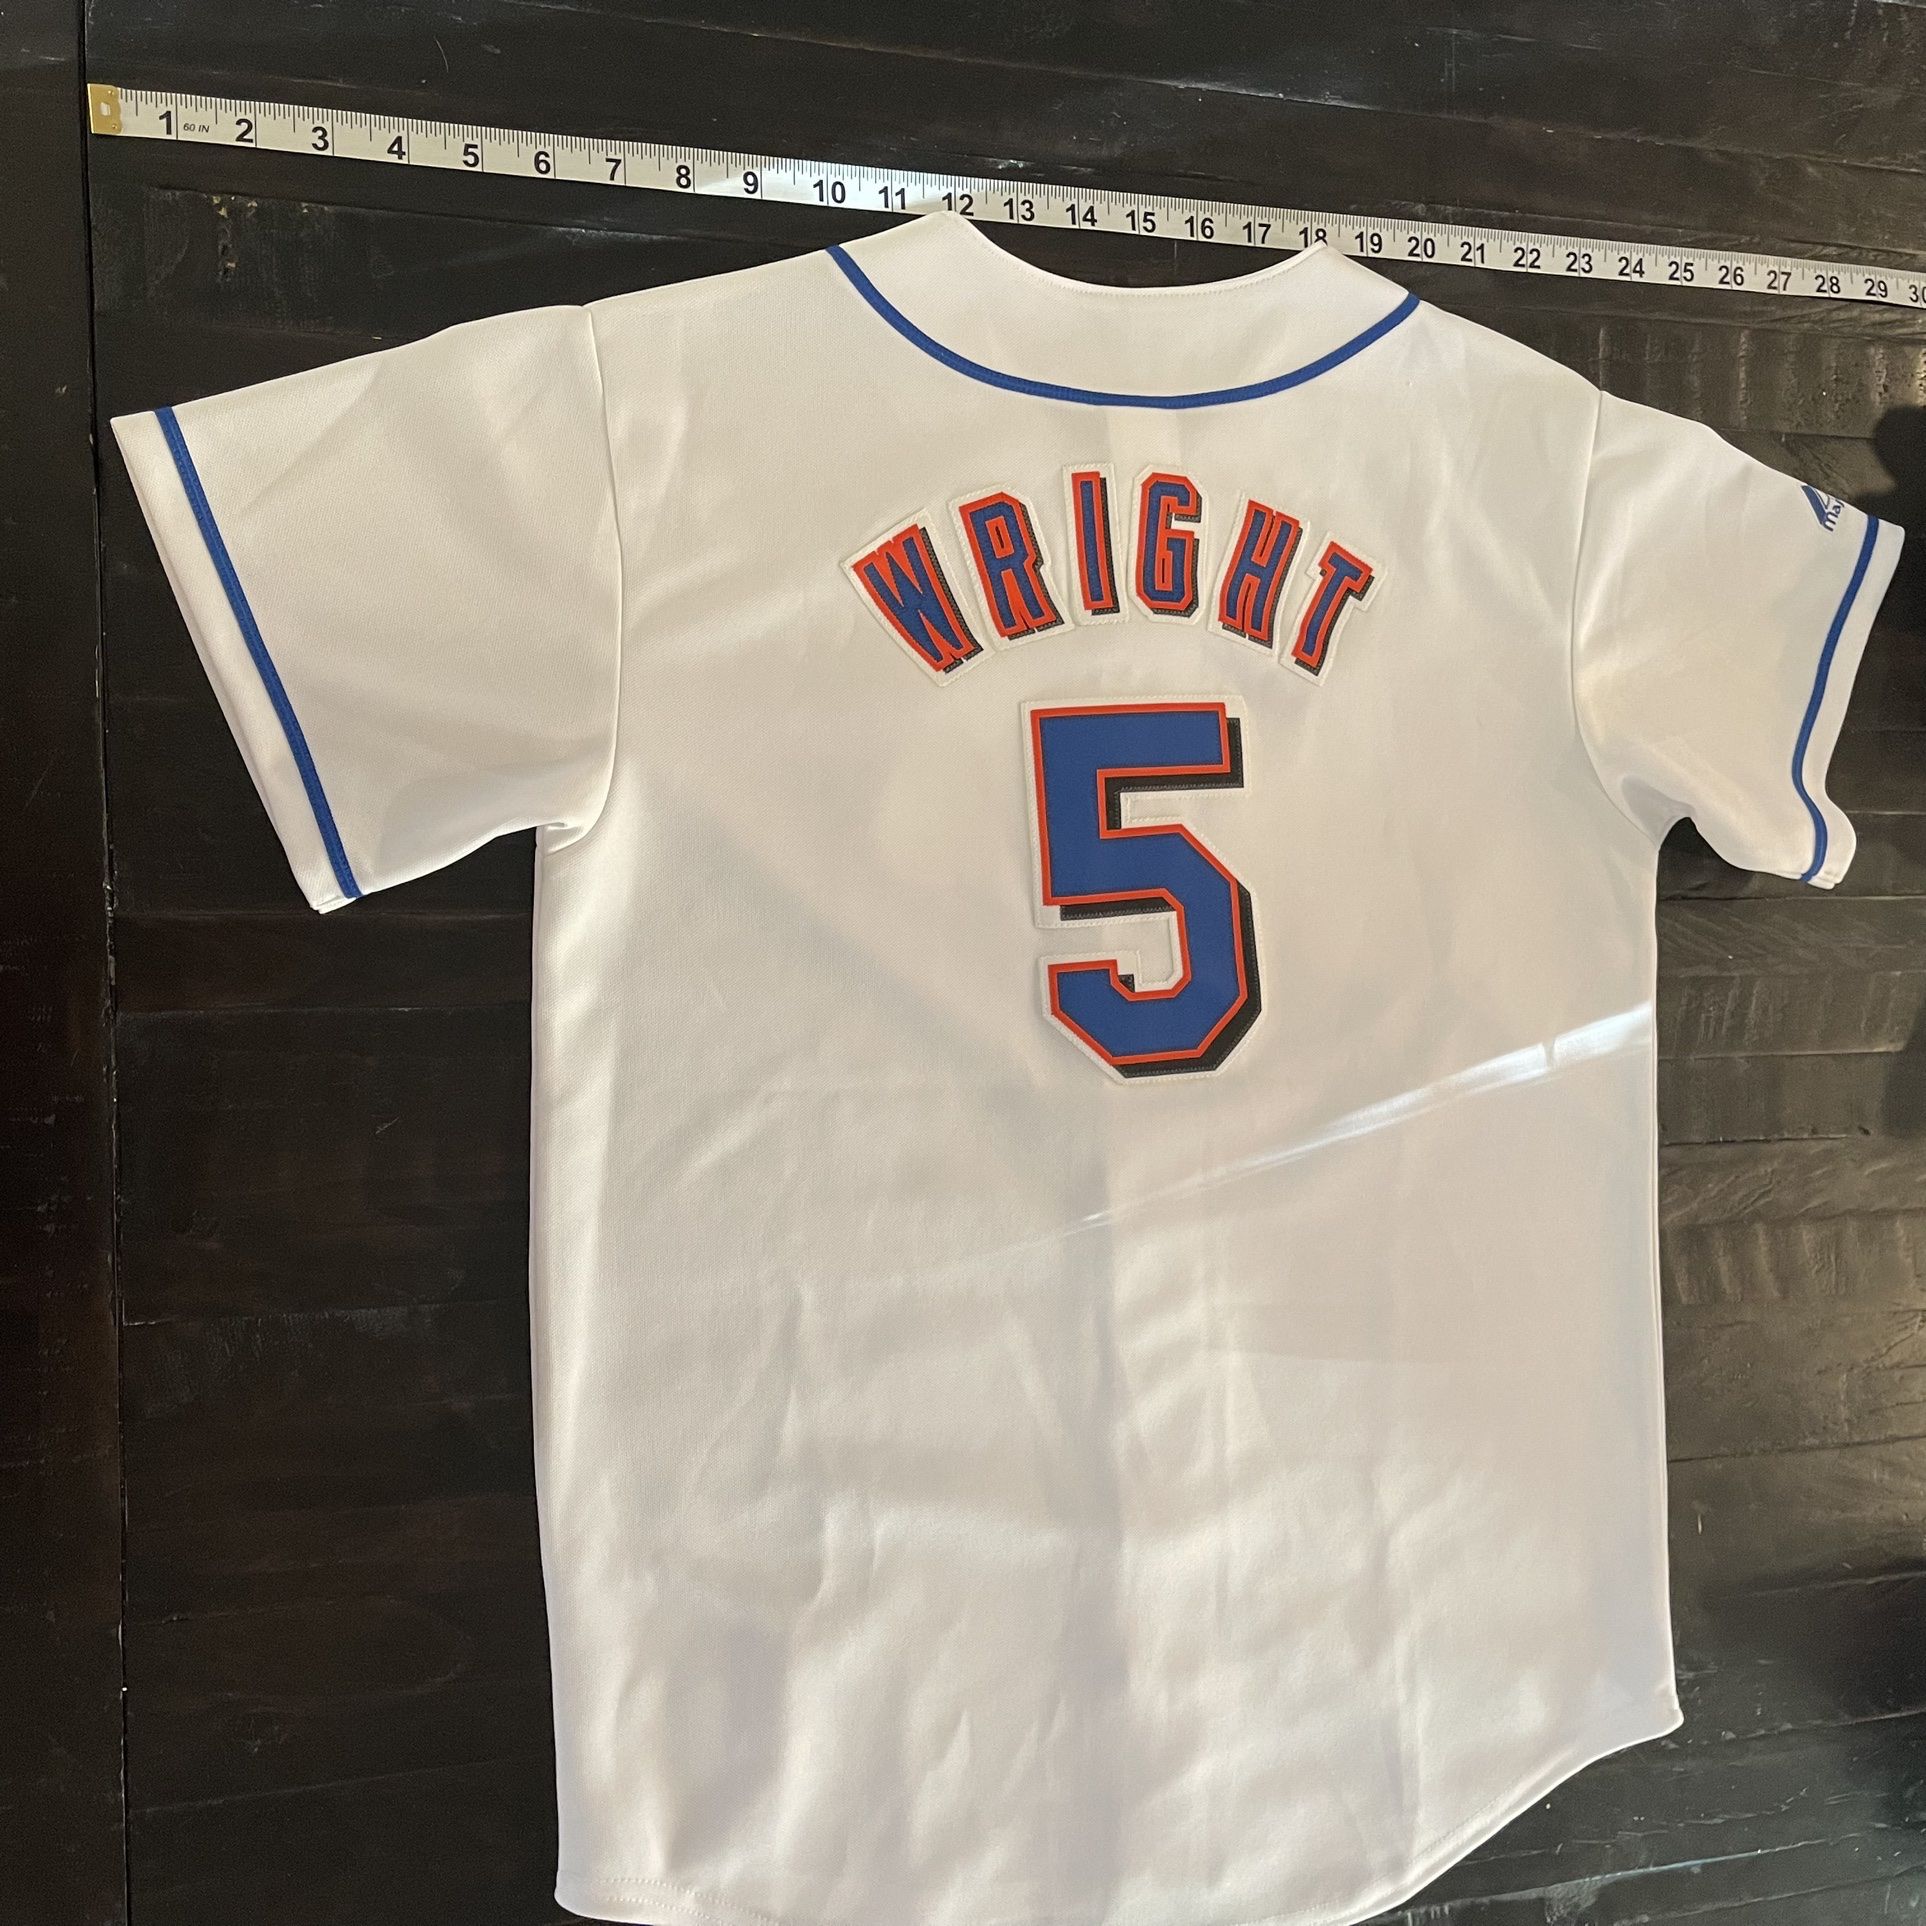 Majestic New York Mets MLB Jerseys for sale